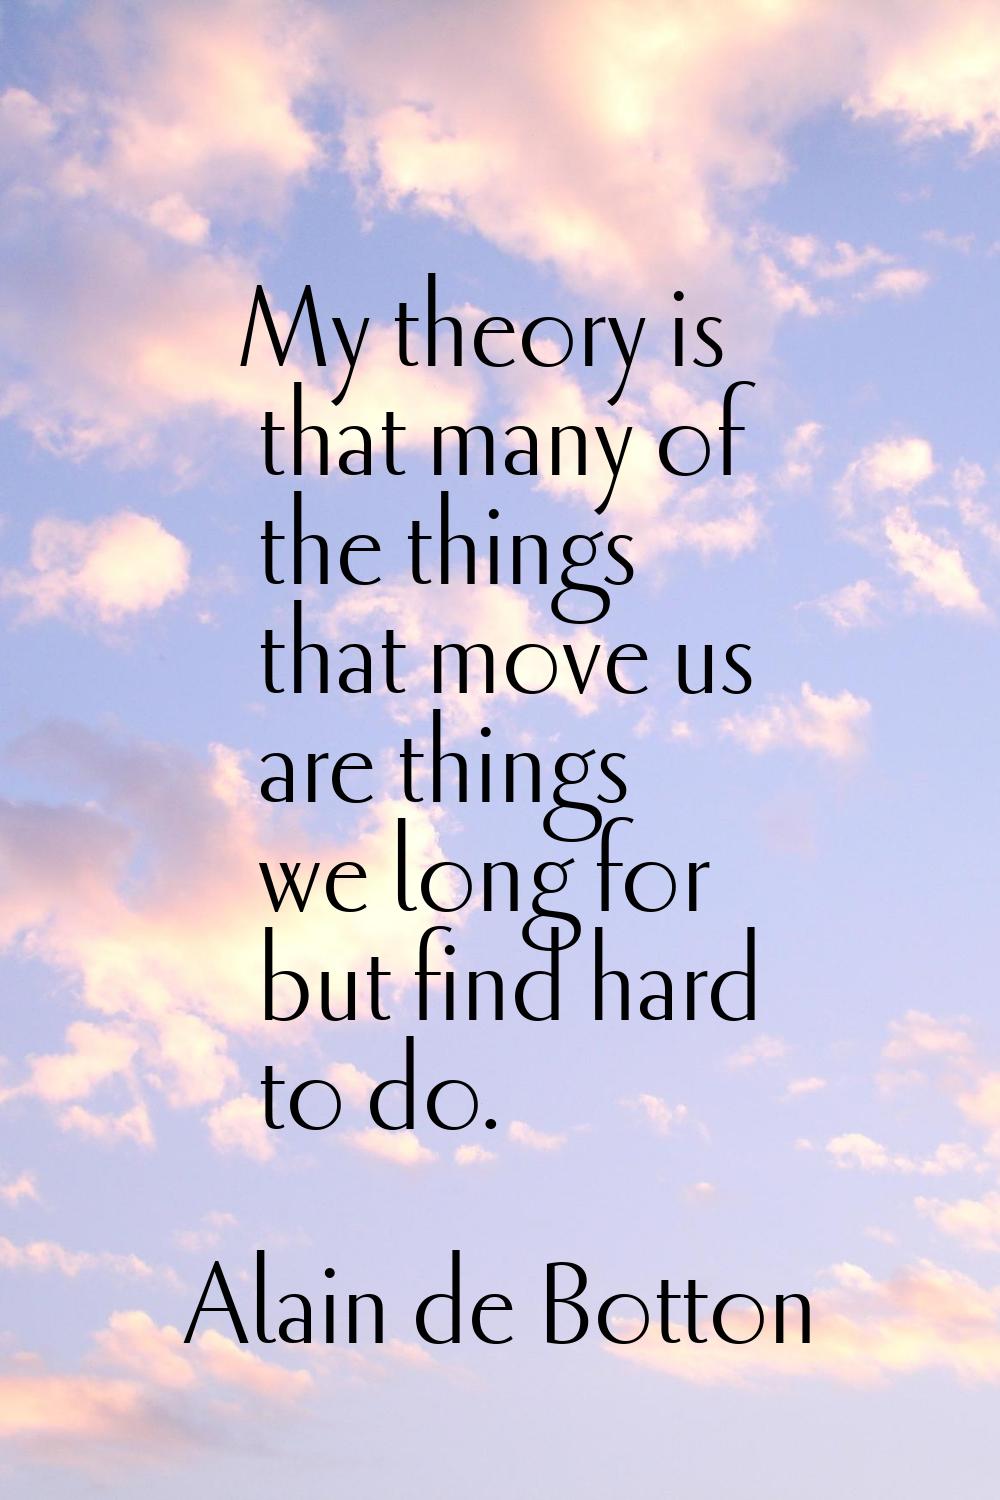 My theory is that many of the things that move us are things we long for but find hard to do.